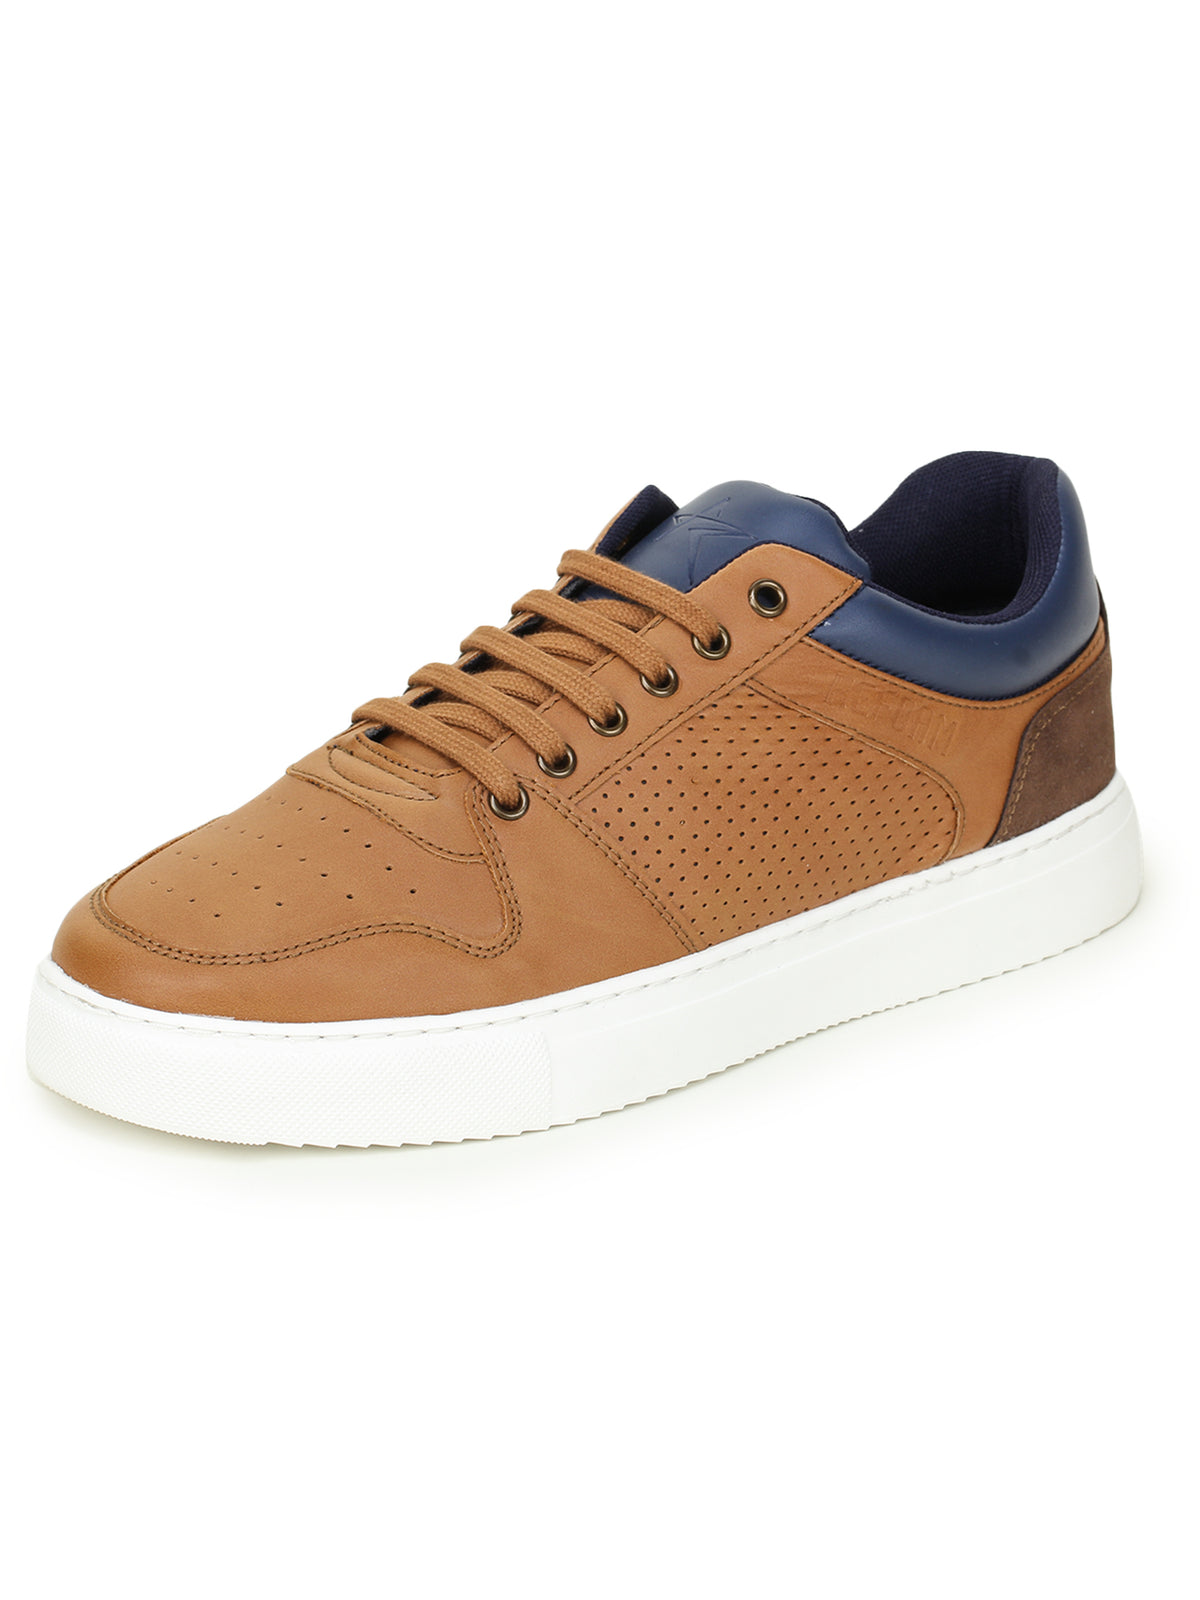 Beige Solid Fabric Lace Up Lifestyle Casual Shoes For Men